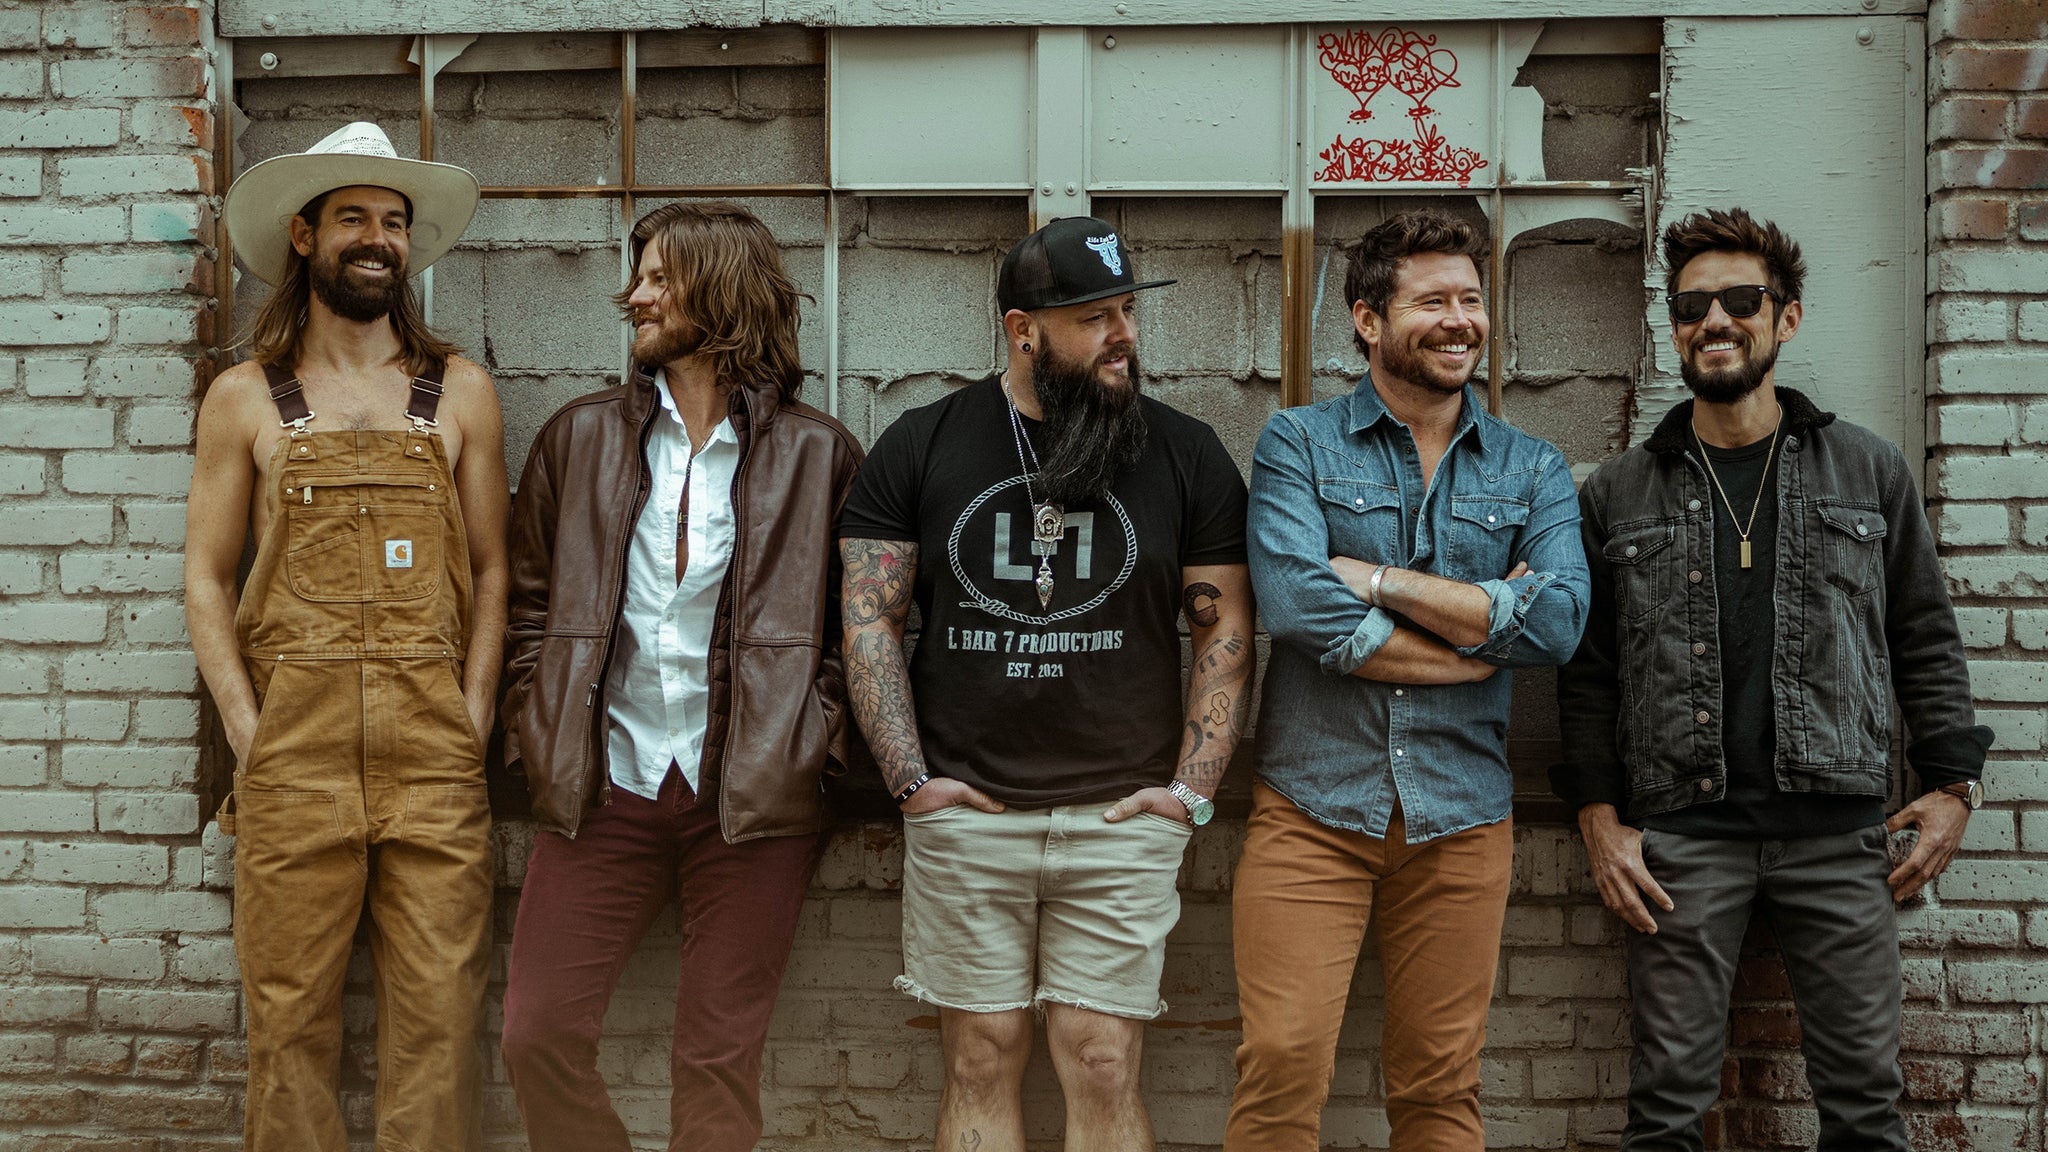 Shane Smith and the Saints in Charlottesville promo photo for VIP Package Onsale presale offer code